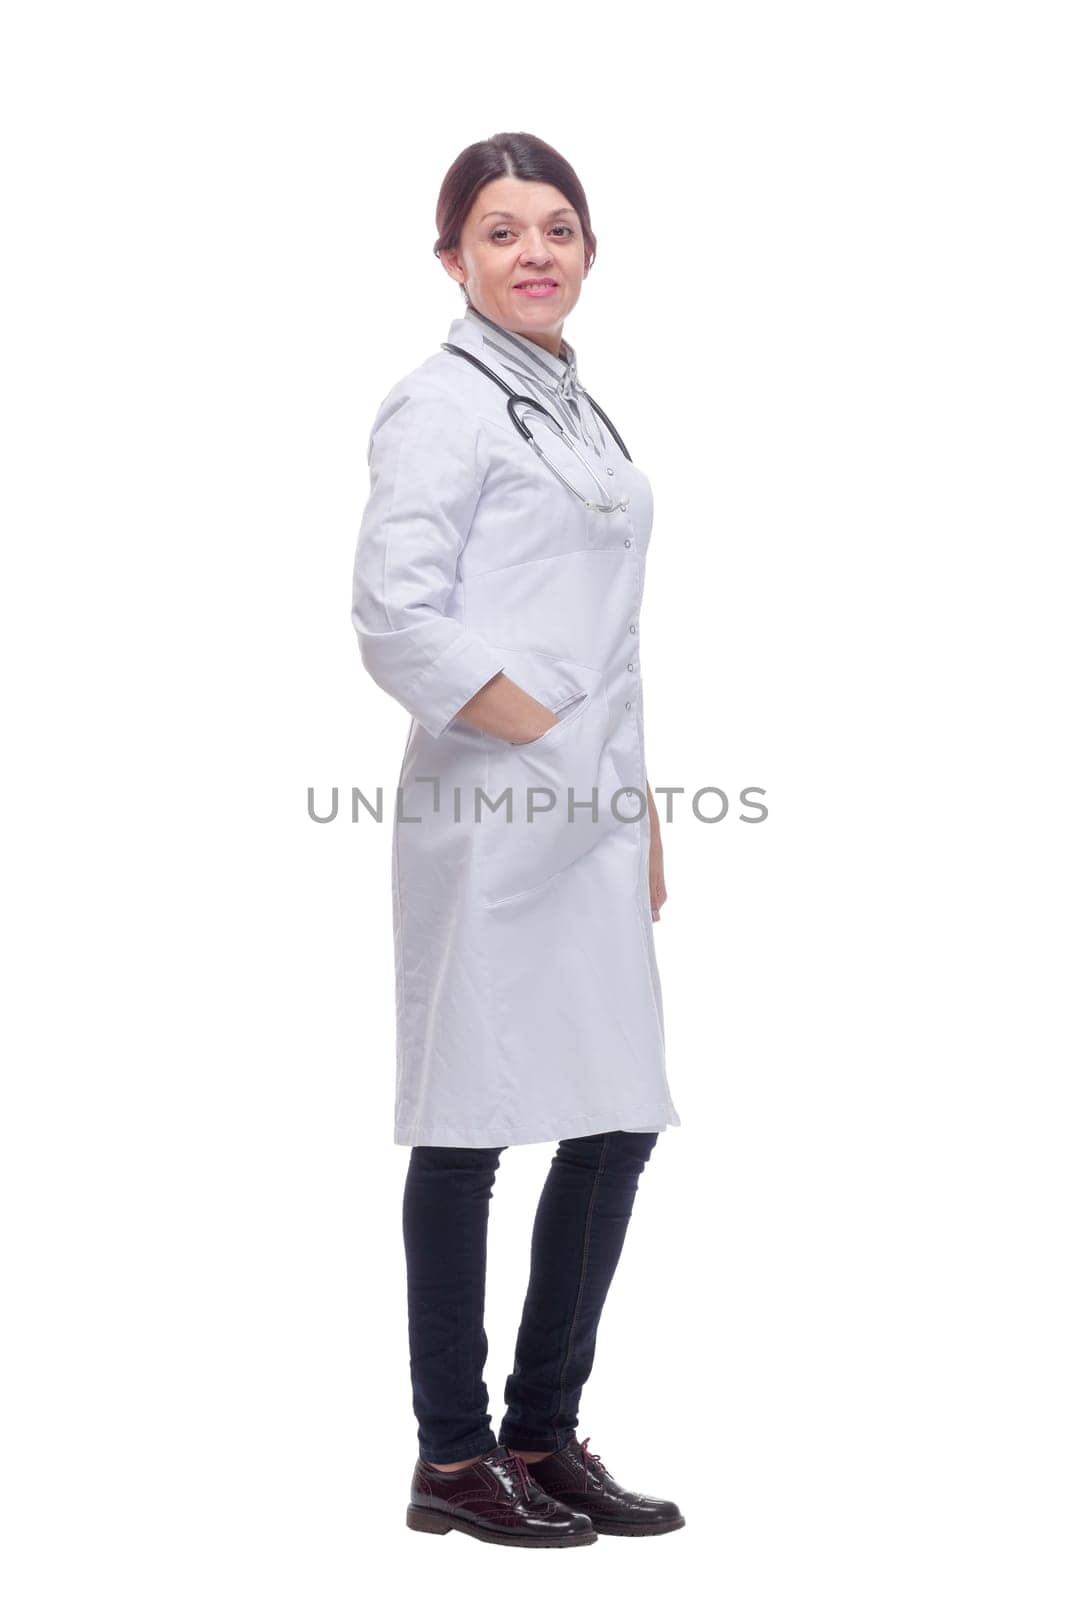 Portrait of an attractive young female doctor or nurse with stethoscope in white uniform by asdf